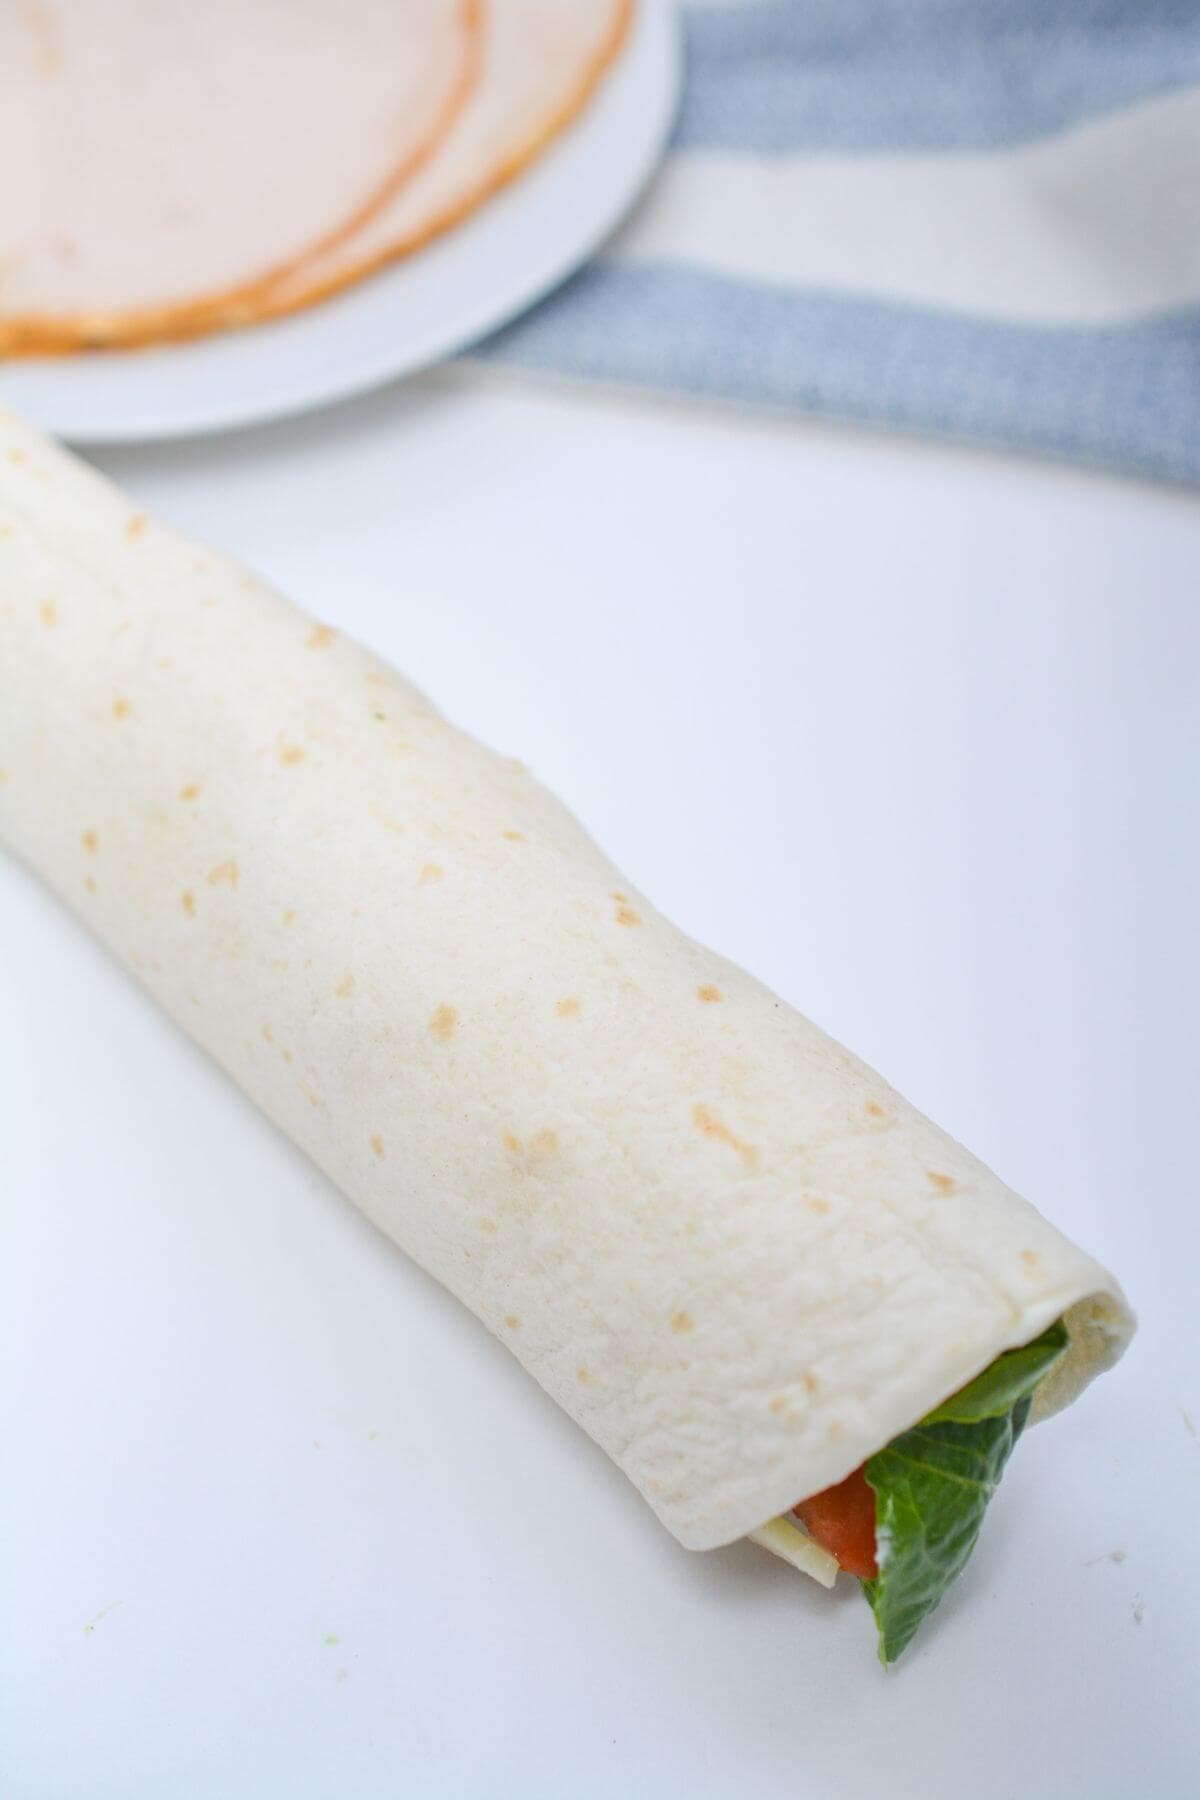 A tortilla wrap is sitting on a table next to a plate.